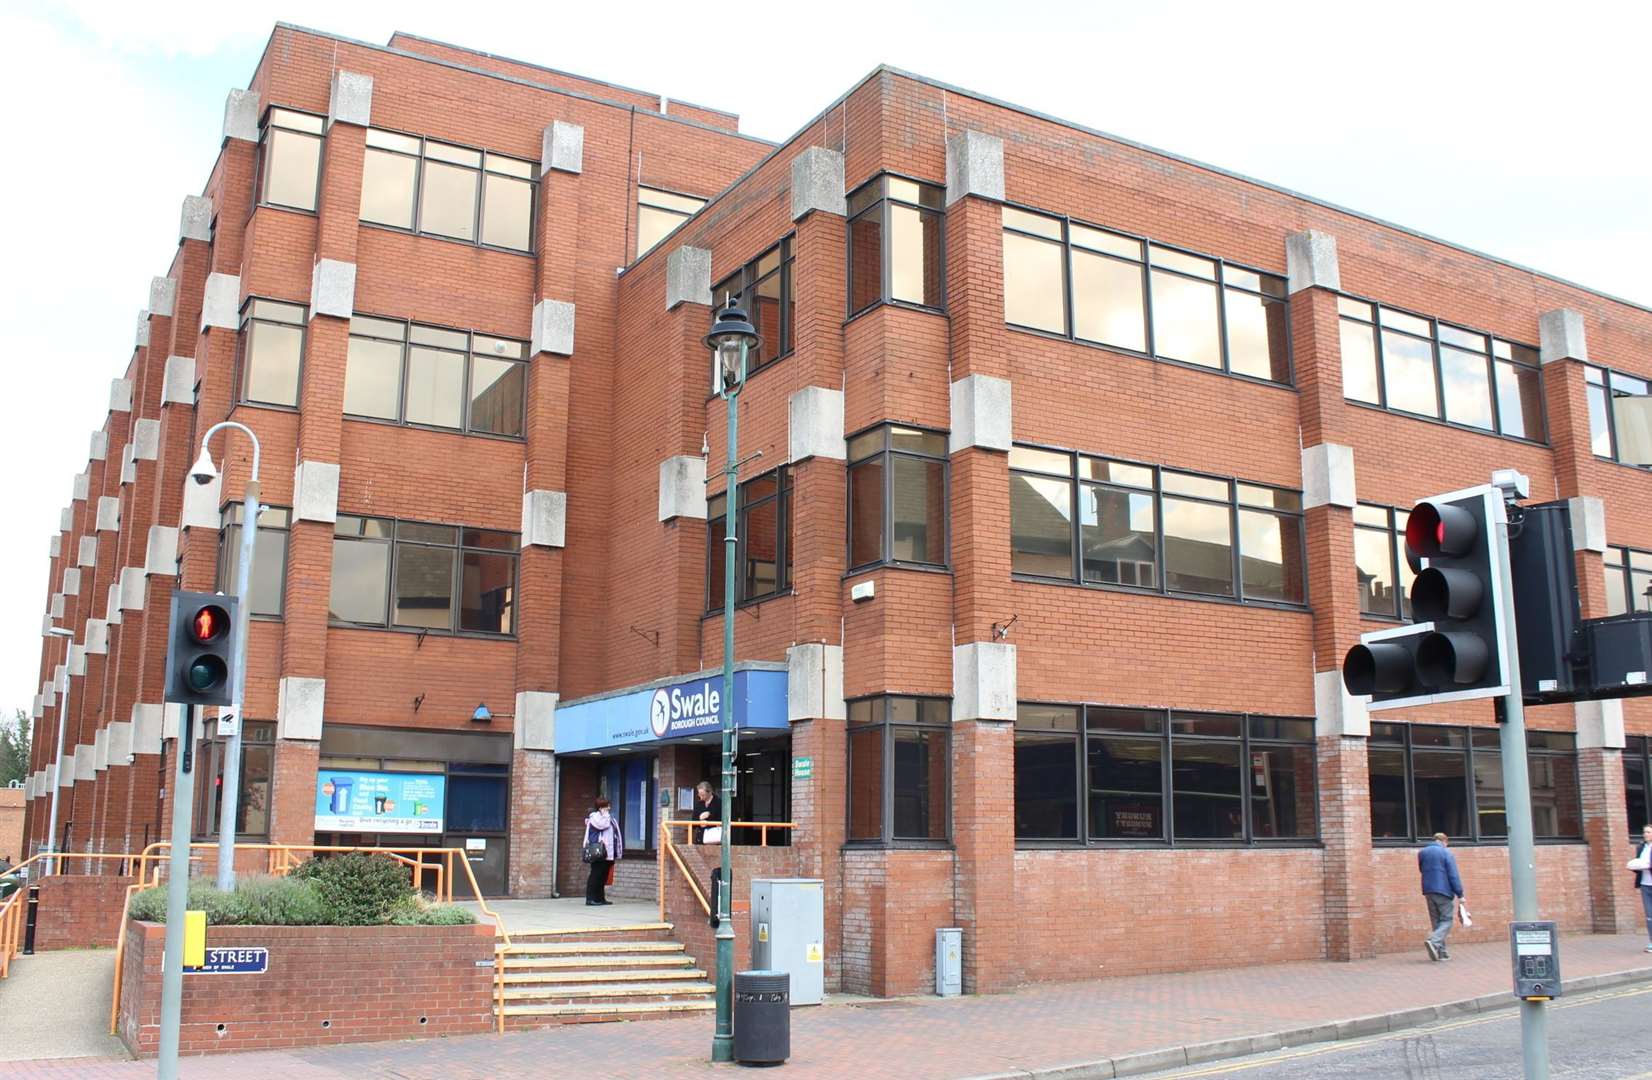 Swale council's HQ in East Street, Sittingbourne